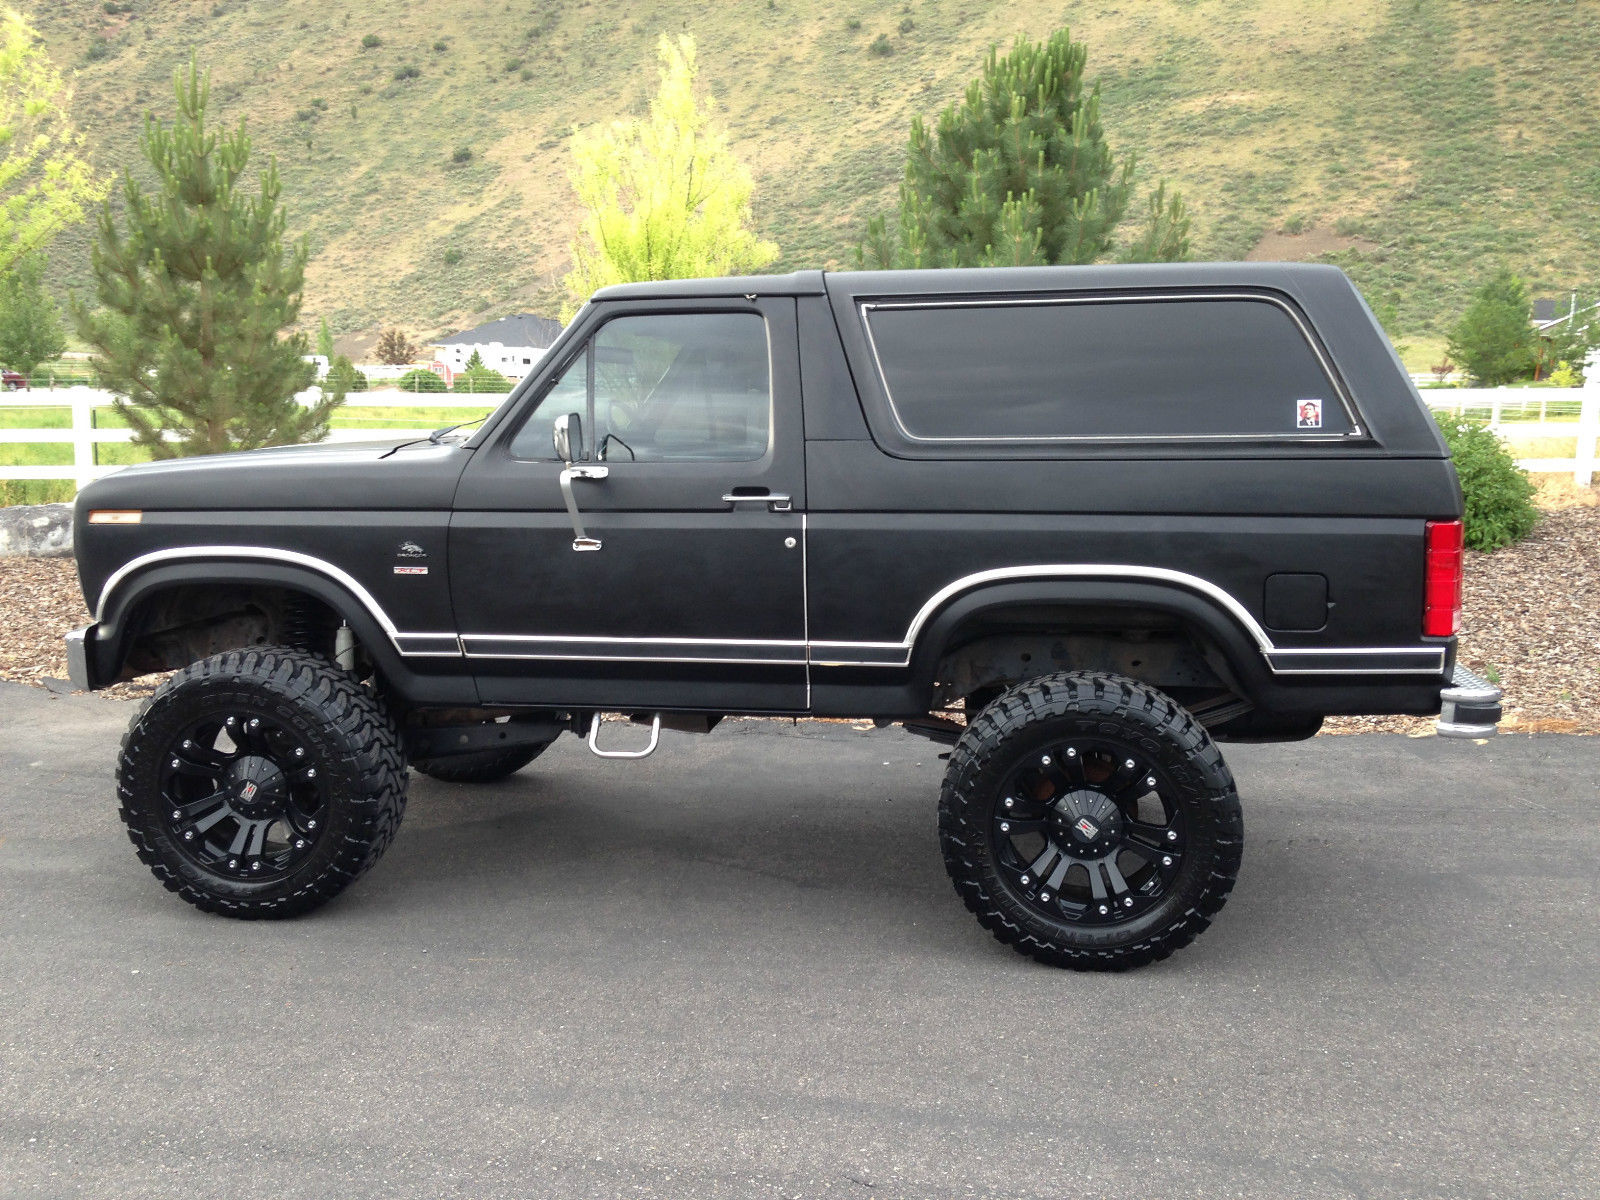 1983 Ford Bronco for sale in Inkom, Idaho, United States.